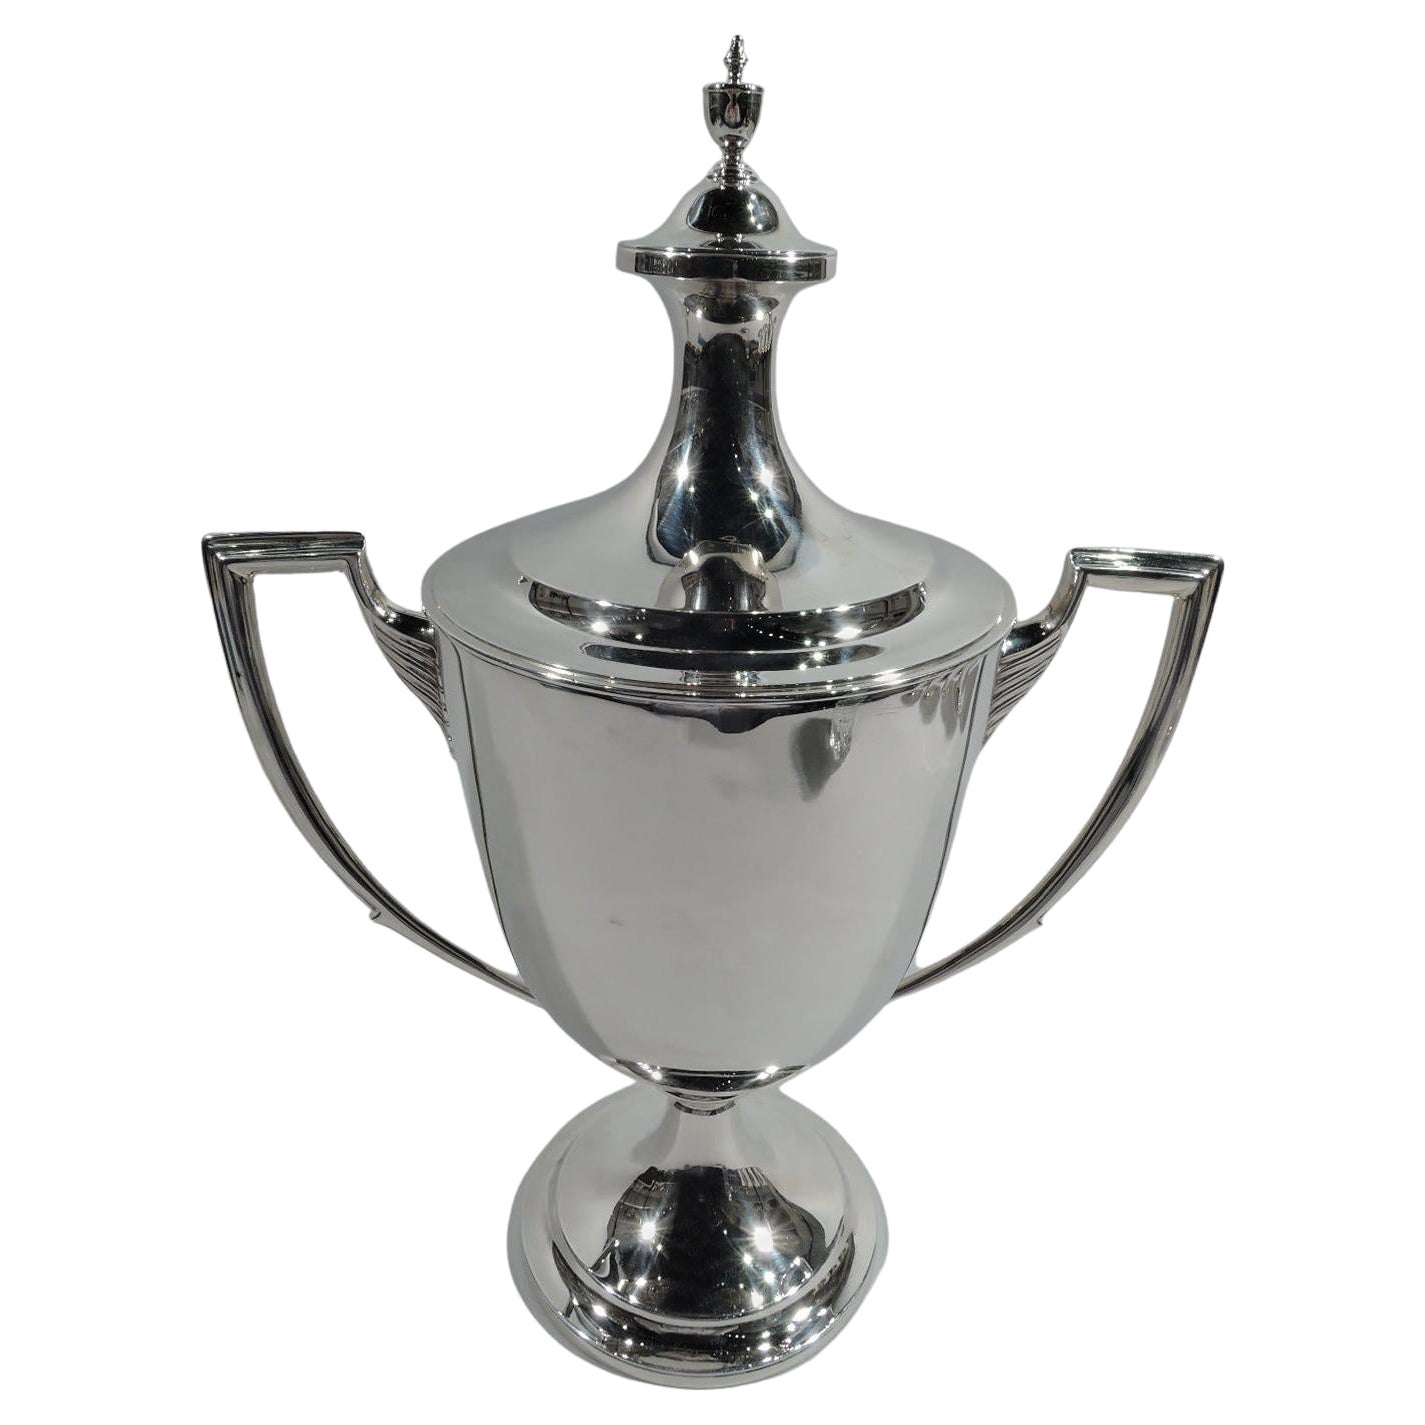 English Edwardian Neoclassical Covered Urn Trophy Cup by Crichton